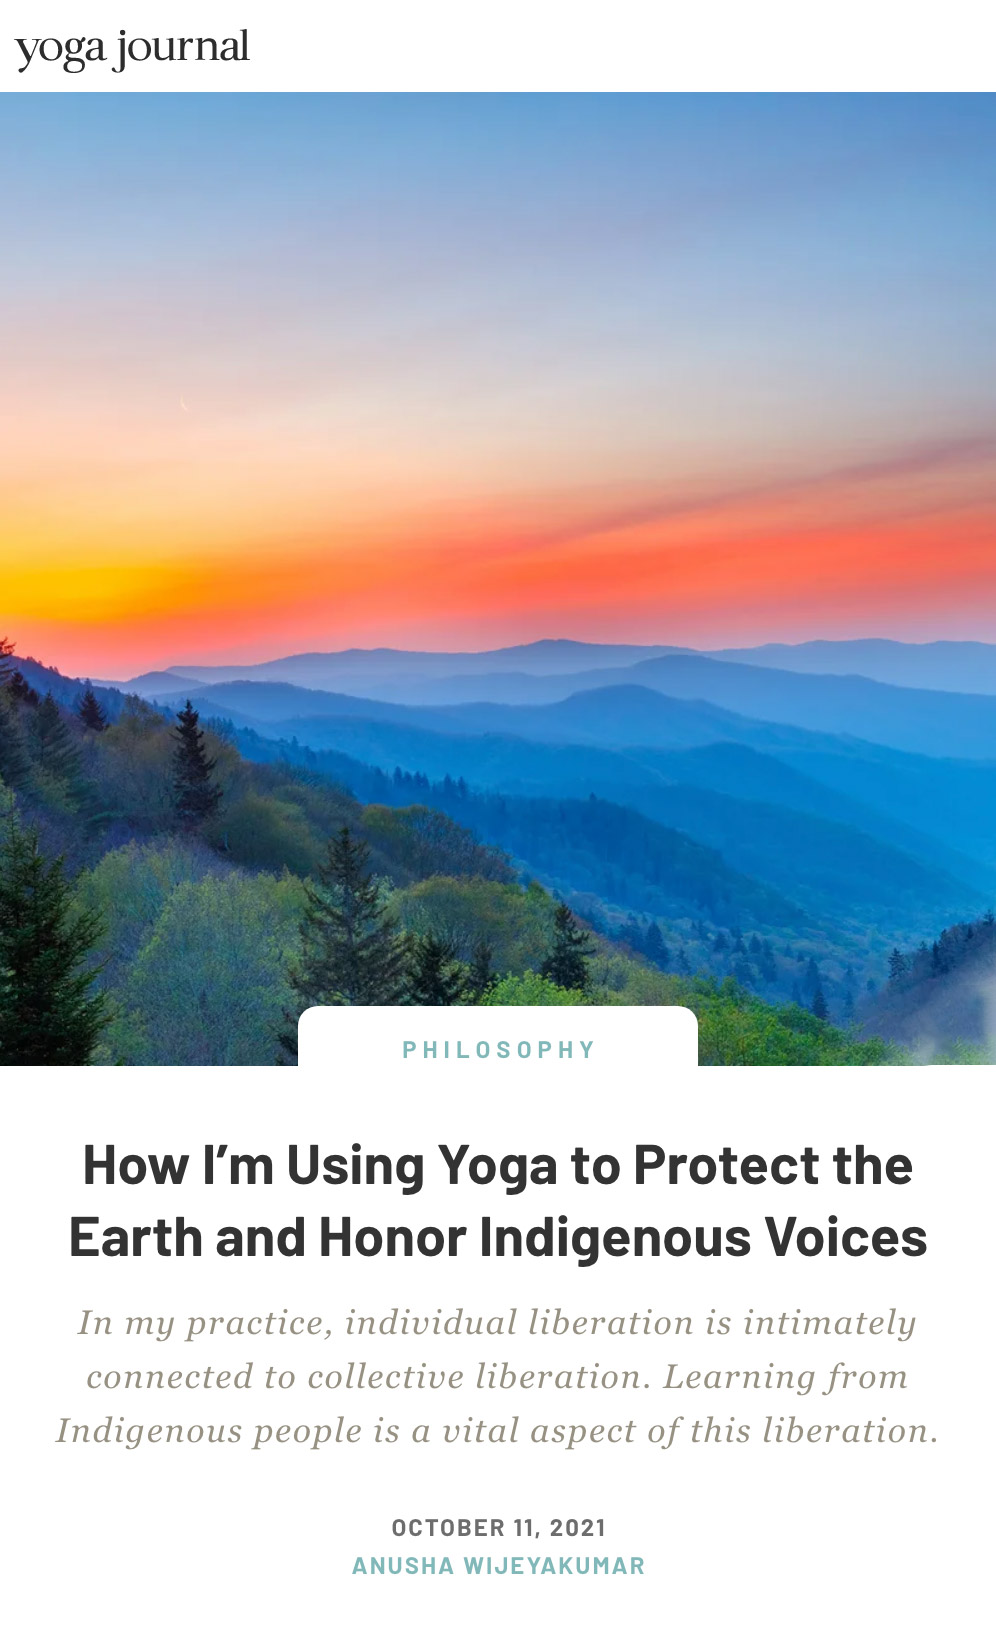 How I’m Using Yoga to Protect the Earth and Honor Indigenous Voices